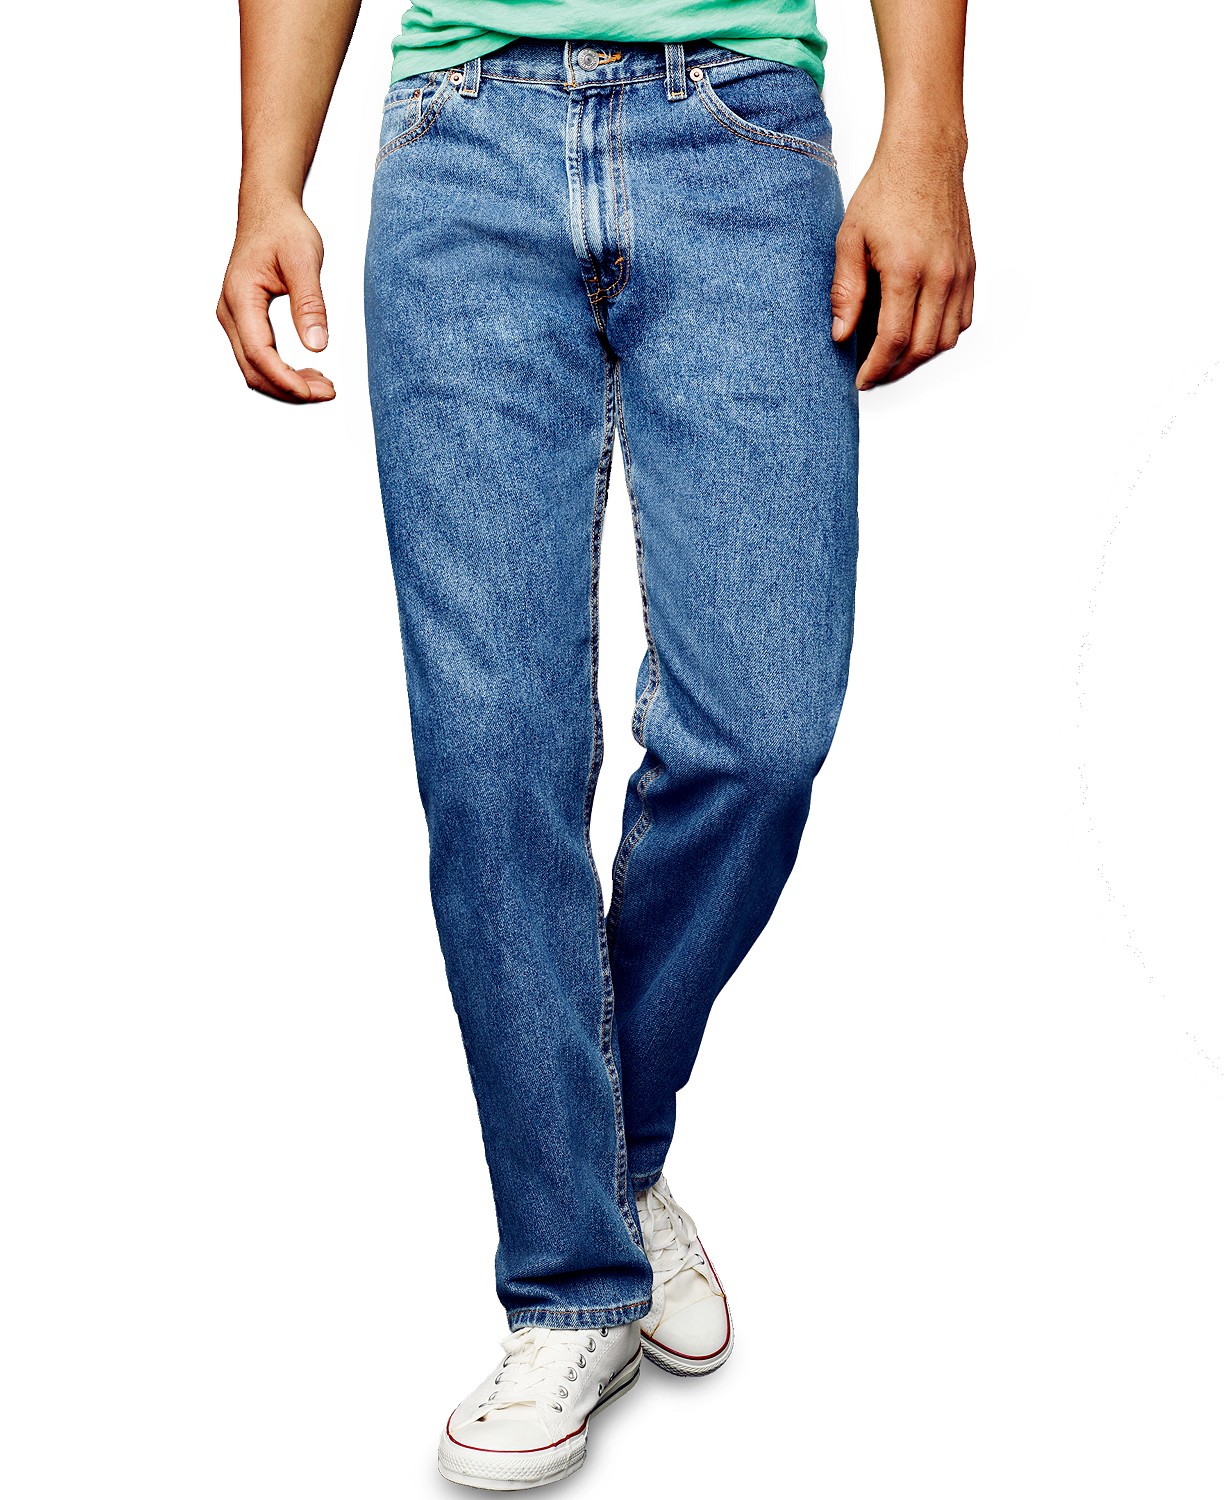 Mens 505 Regular Fit Non-Stretch Jeans